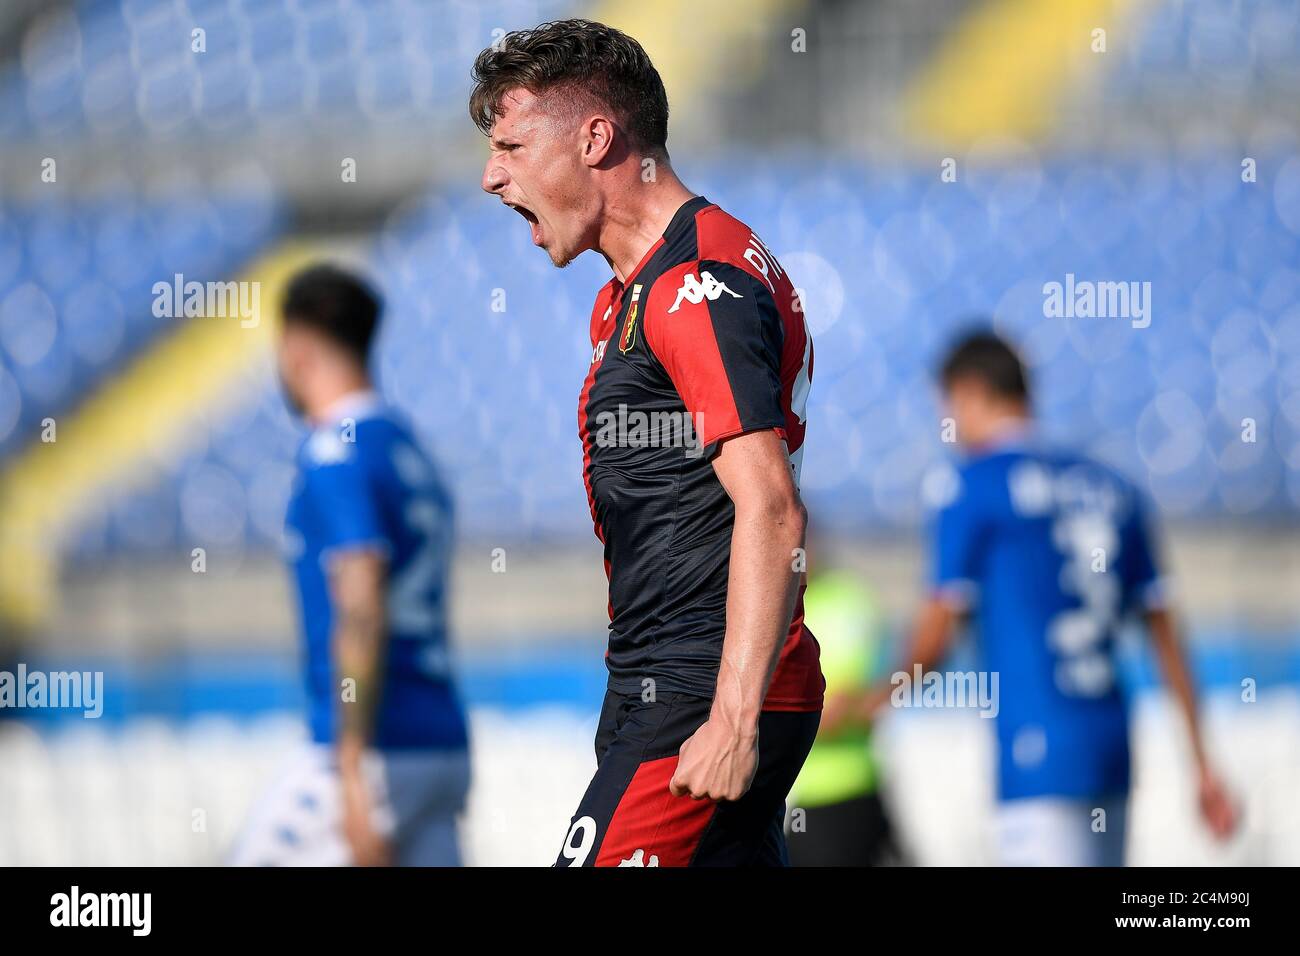 Brescia, Italy - 27 June, 2020: Andrea Pinamonti of Genoa CFC celebrates after scoring a goal from a penalty kick during the Serie A football match between Brescia Calcio and Genoa CFC. The match ended in a 2-2 tie. Credit: Nicolò Campo/Alamy Live News Stock Photo